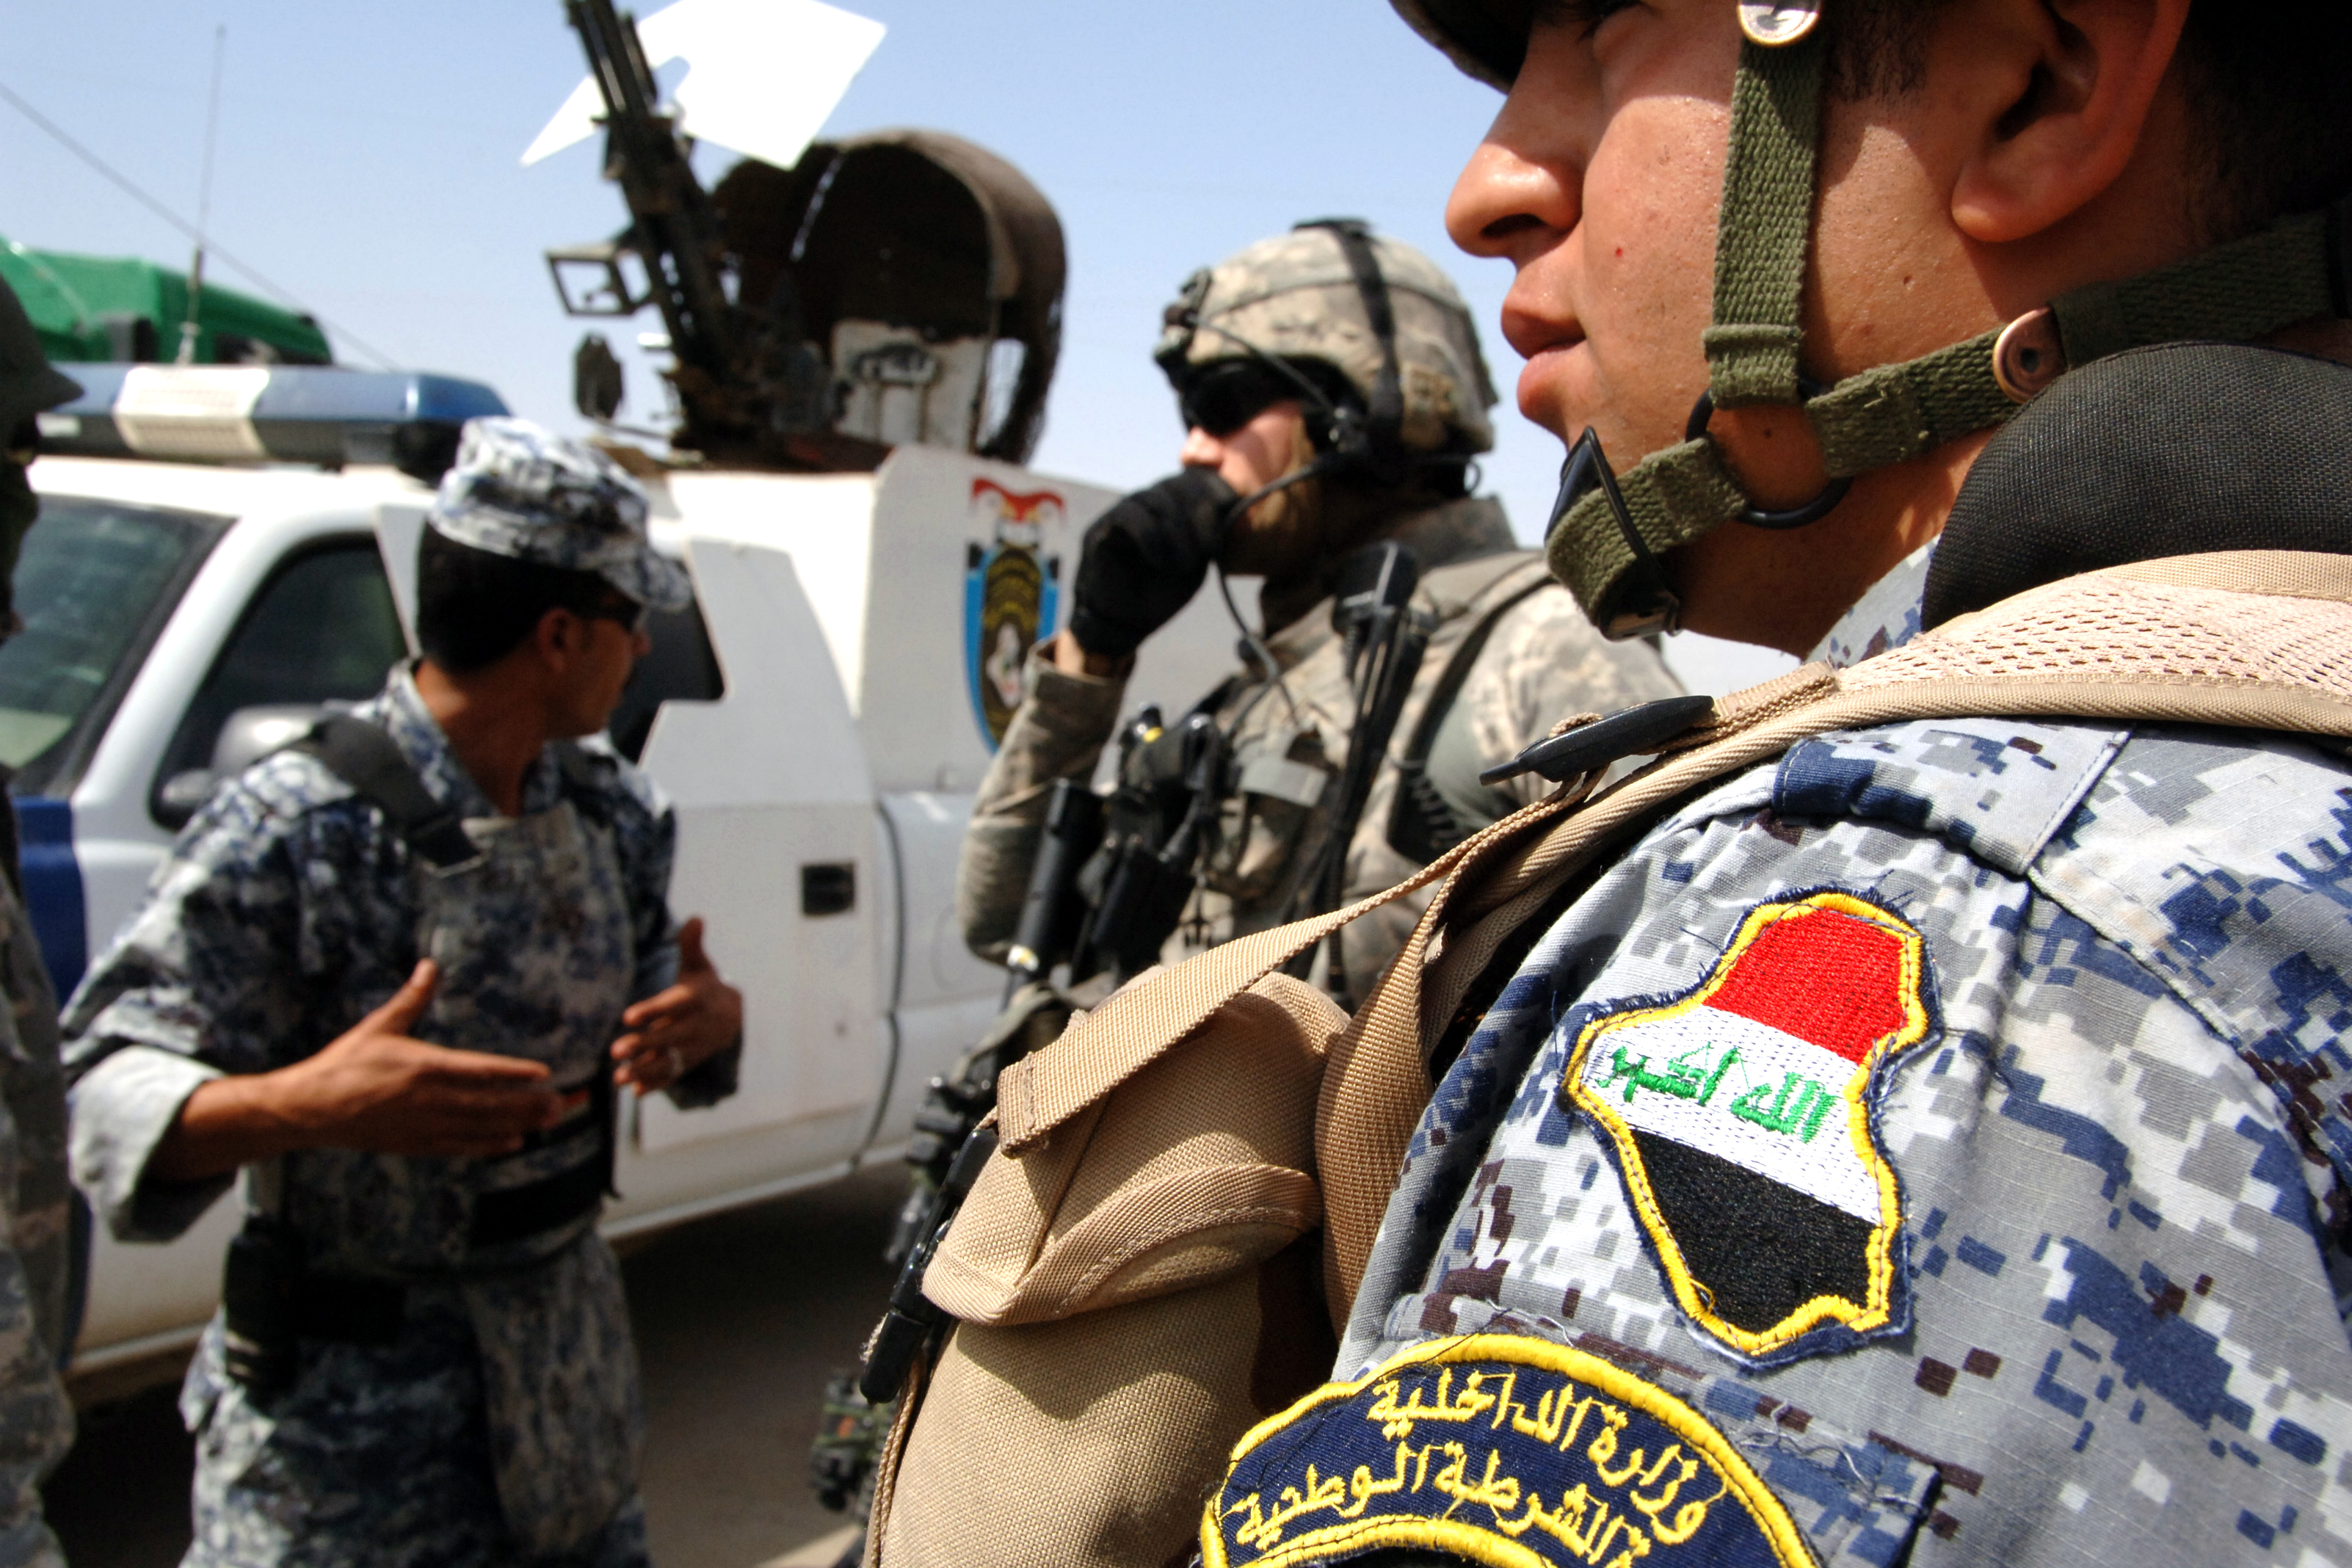 U.S. Army Staff Sgt. David Snow, from Military Police Platoon, Headquarters and Headquarters Company, Brigade Special Troops Battalion, 4th Brigade Combat Team, 10th Mountain Division out of Fort Polk, La., speaks to an Iraqi National Police shift leader at a traffic checkpoint near Forward Operating Base Loyalty in Southern Baghdad, May 11, 2008, while his unit conducts a spot check patrol of checkpoints around their base to assess their needs and collect information on sightings of suspicious activity.  (U.S. Army photo by Staff Sgt. Brian D. Lehnhardt/Released)